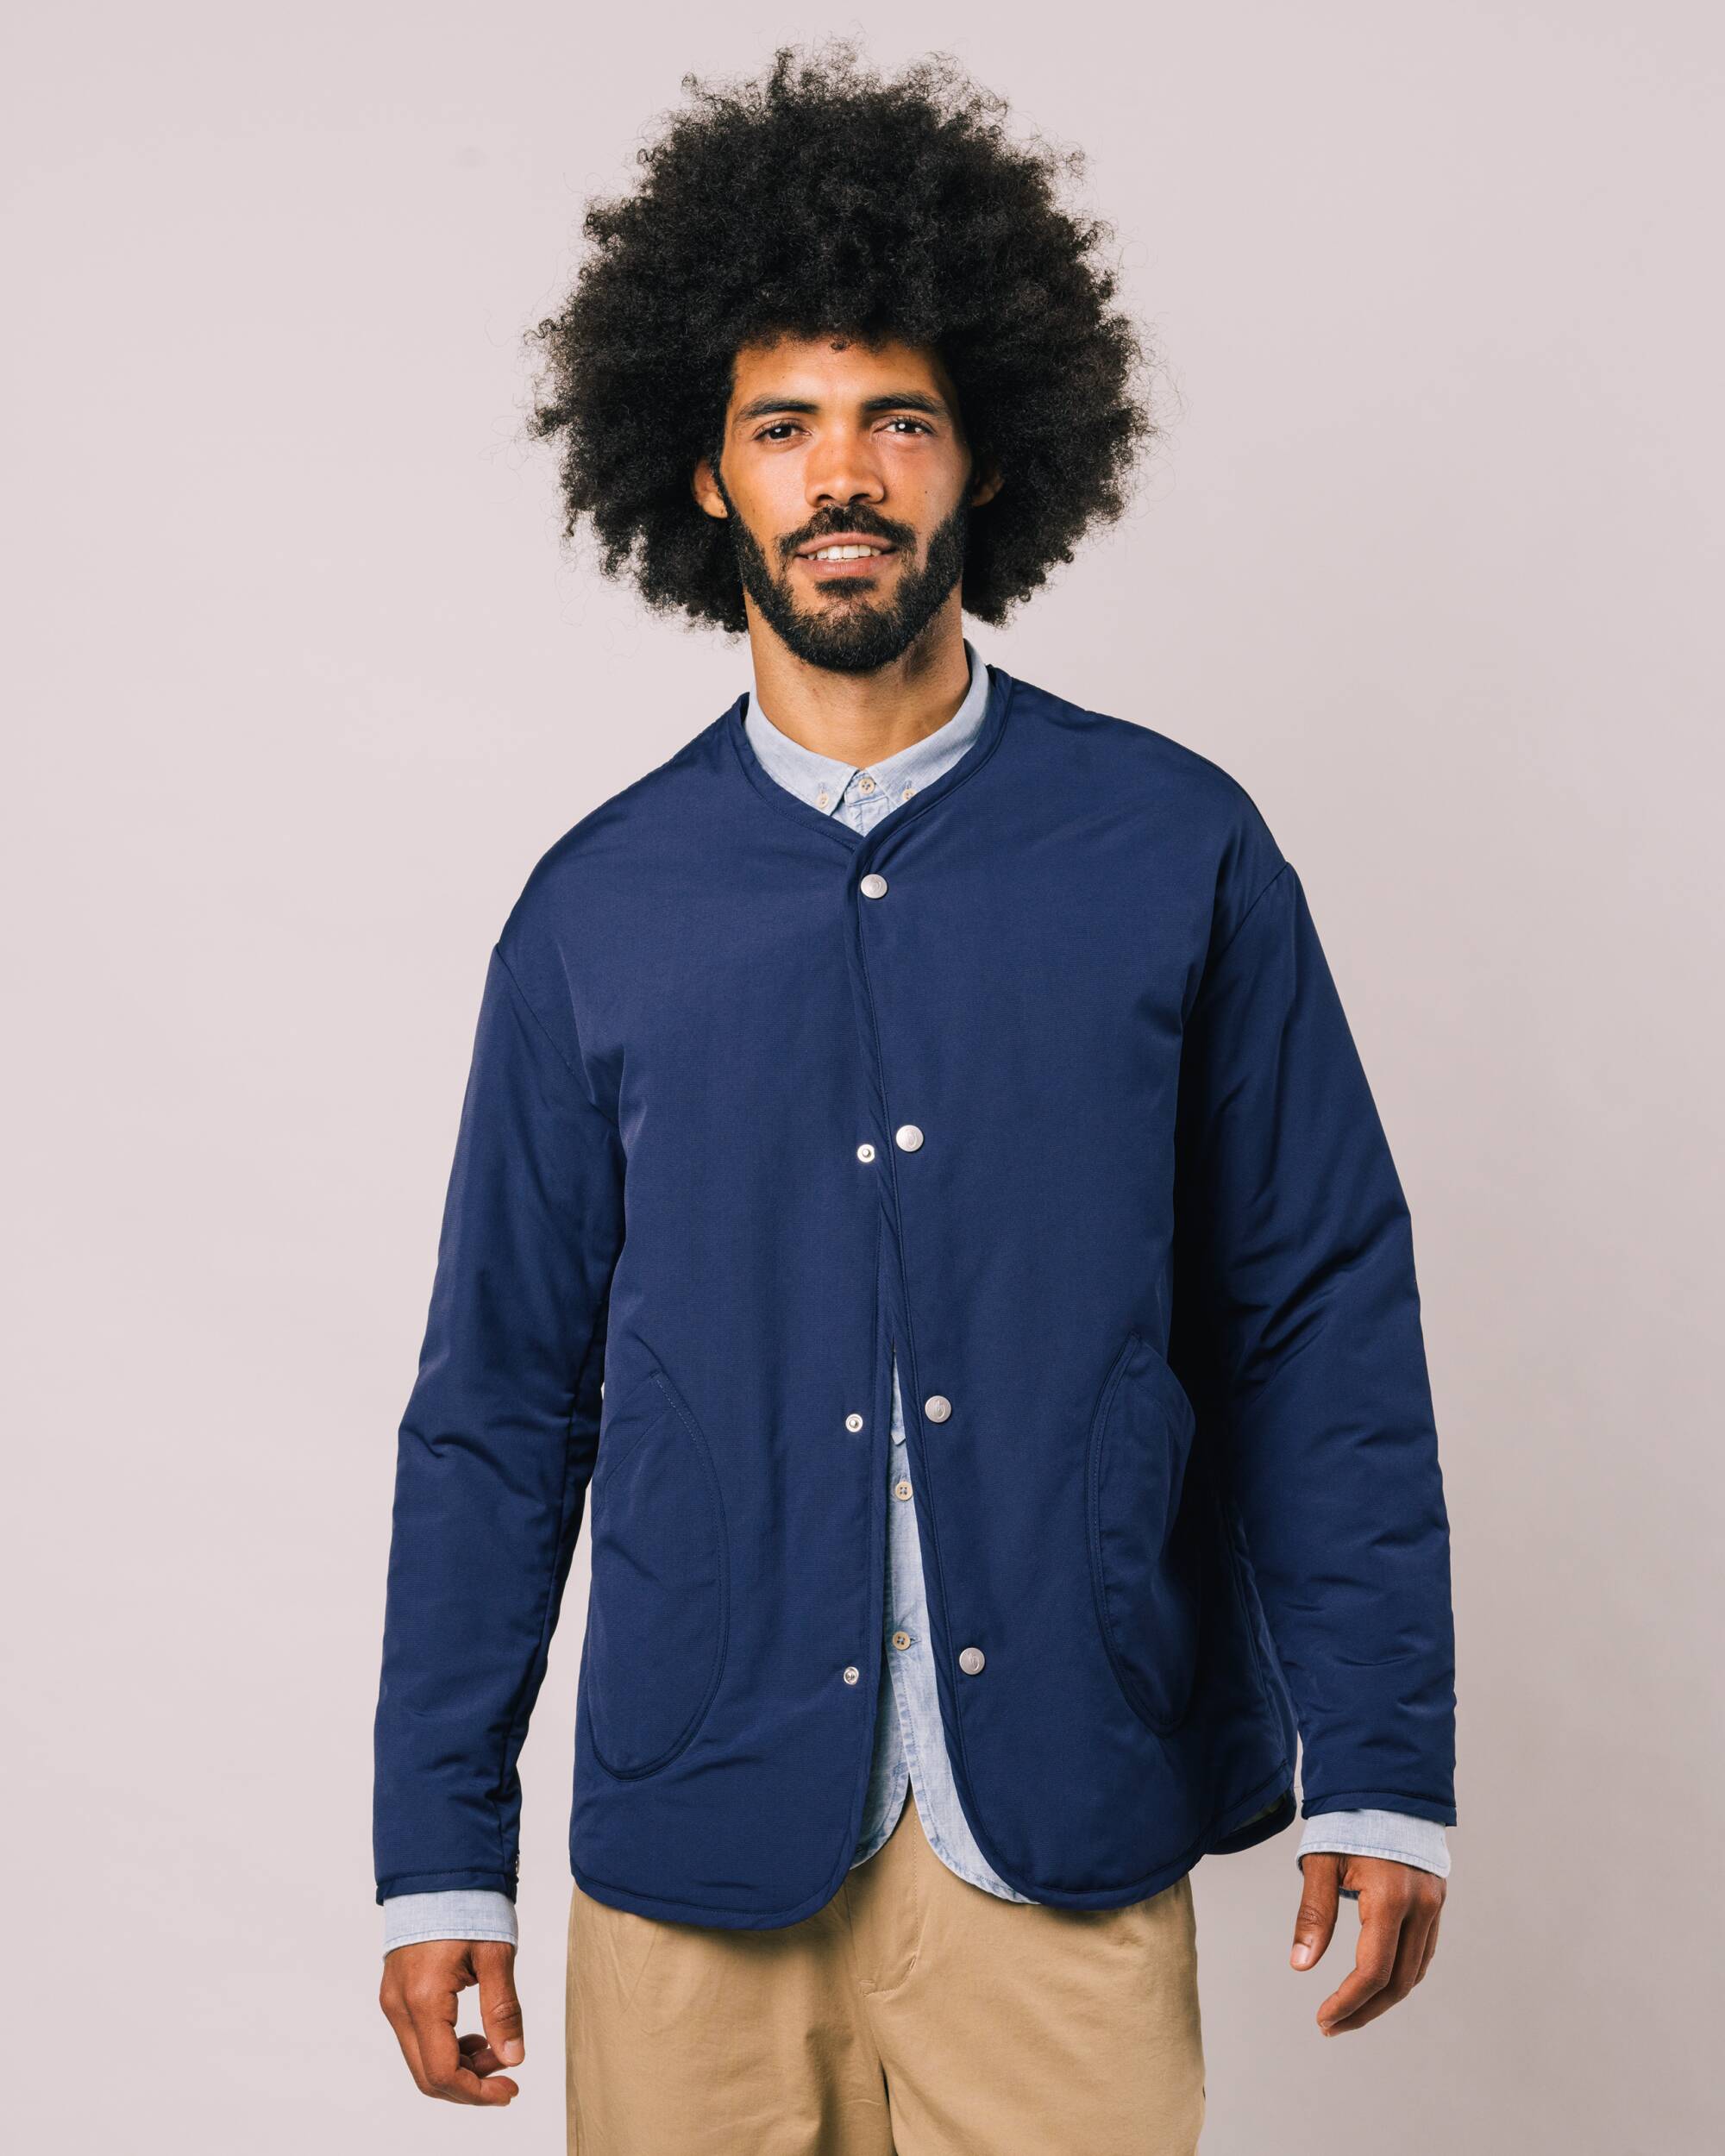 Dark blue, padded oversized jacket made from recycled polyester from Brava Fabrics